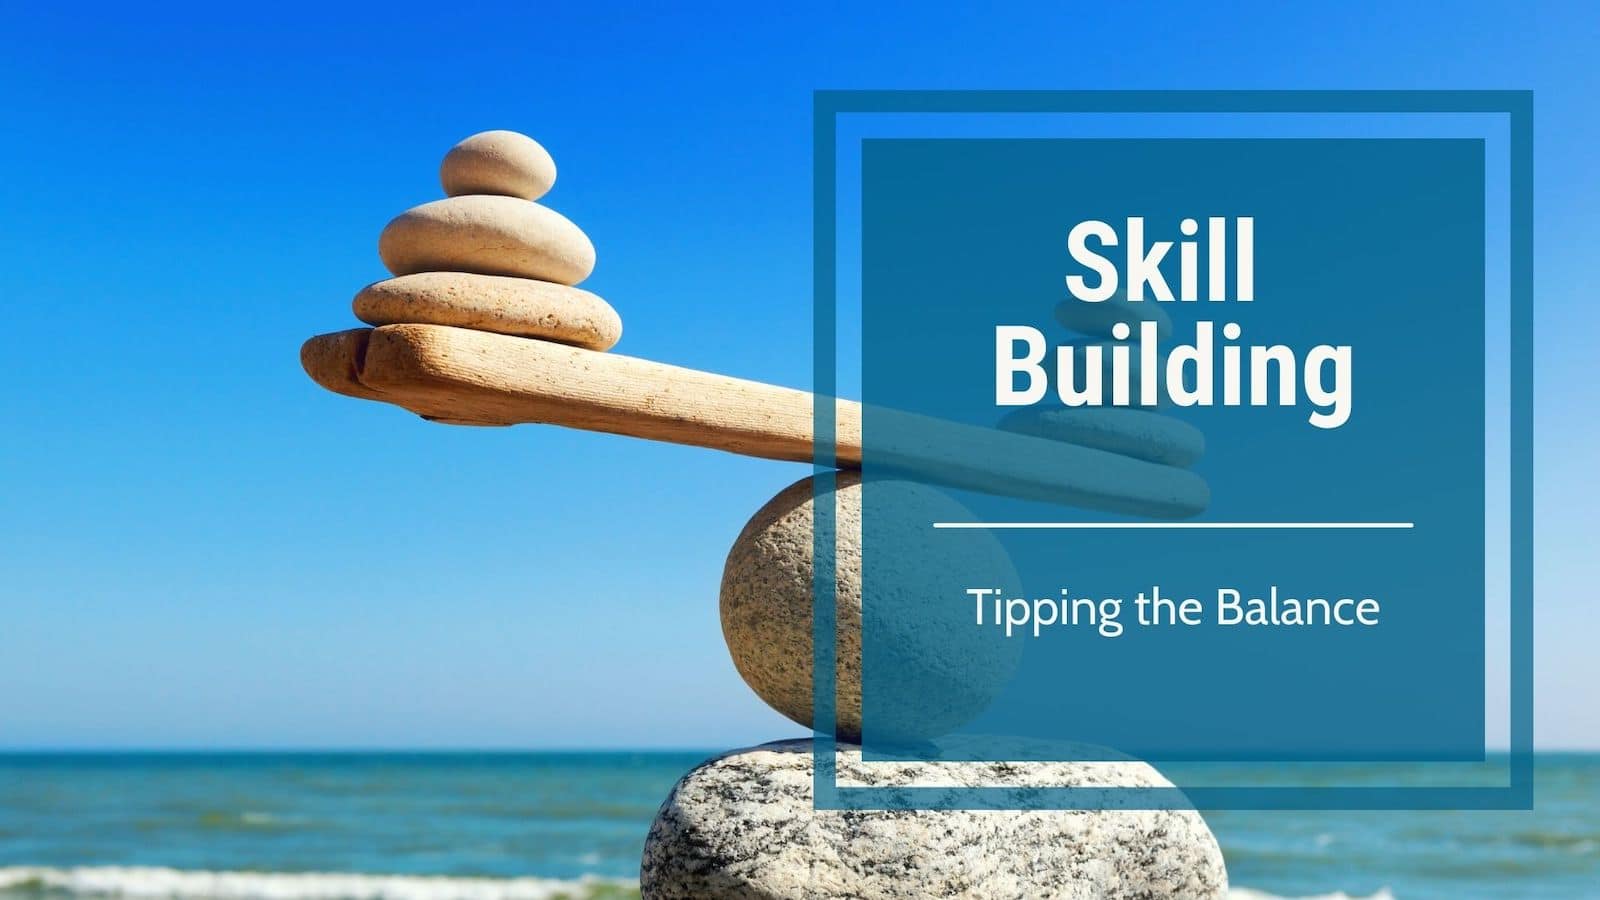 Skill building-Tipping the balance